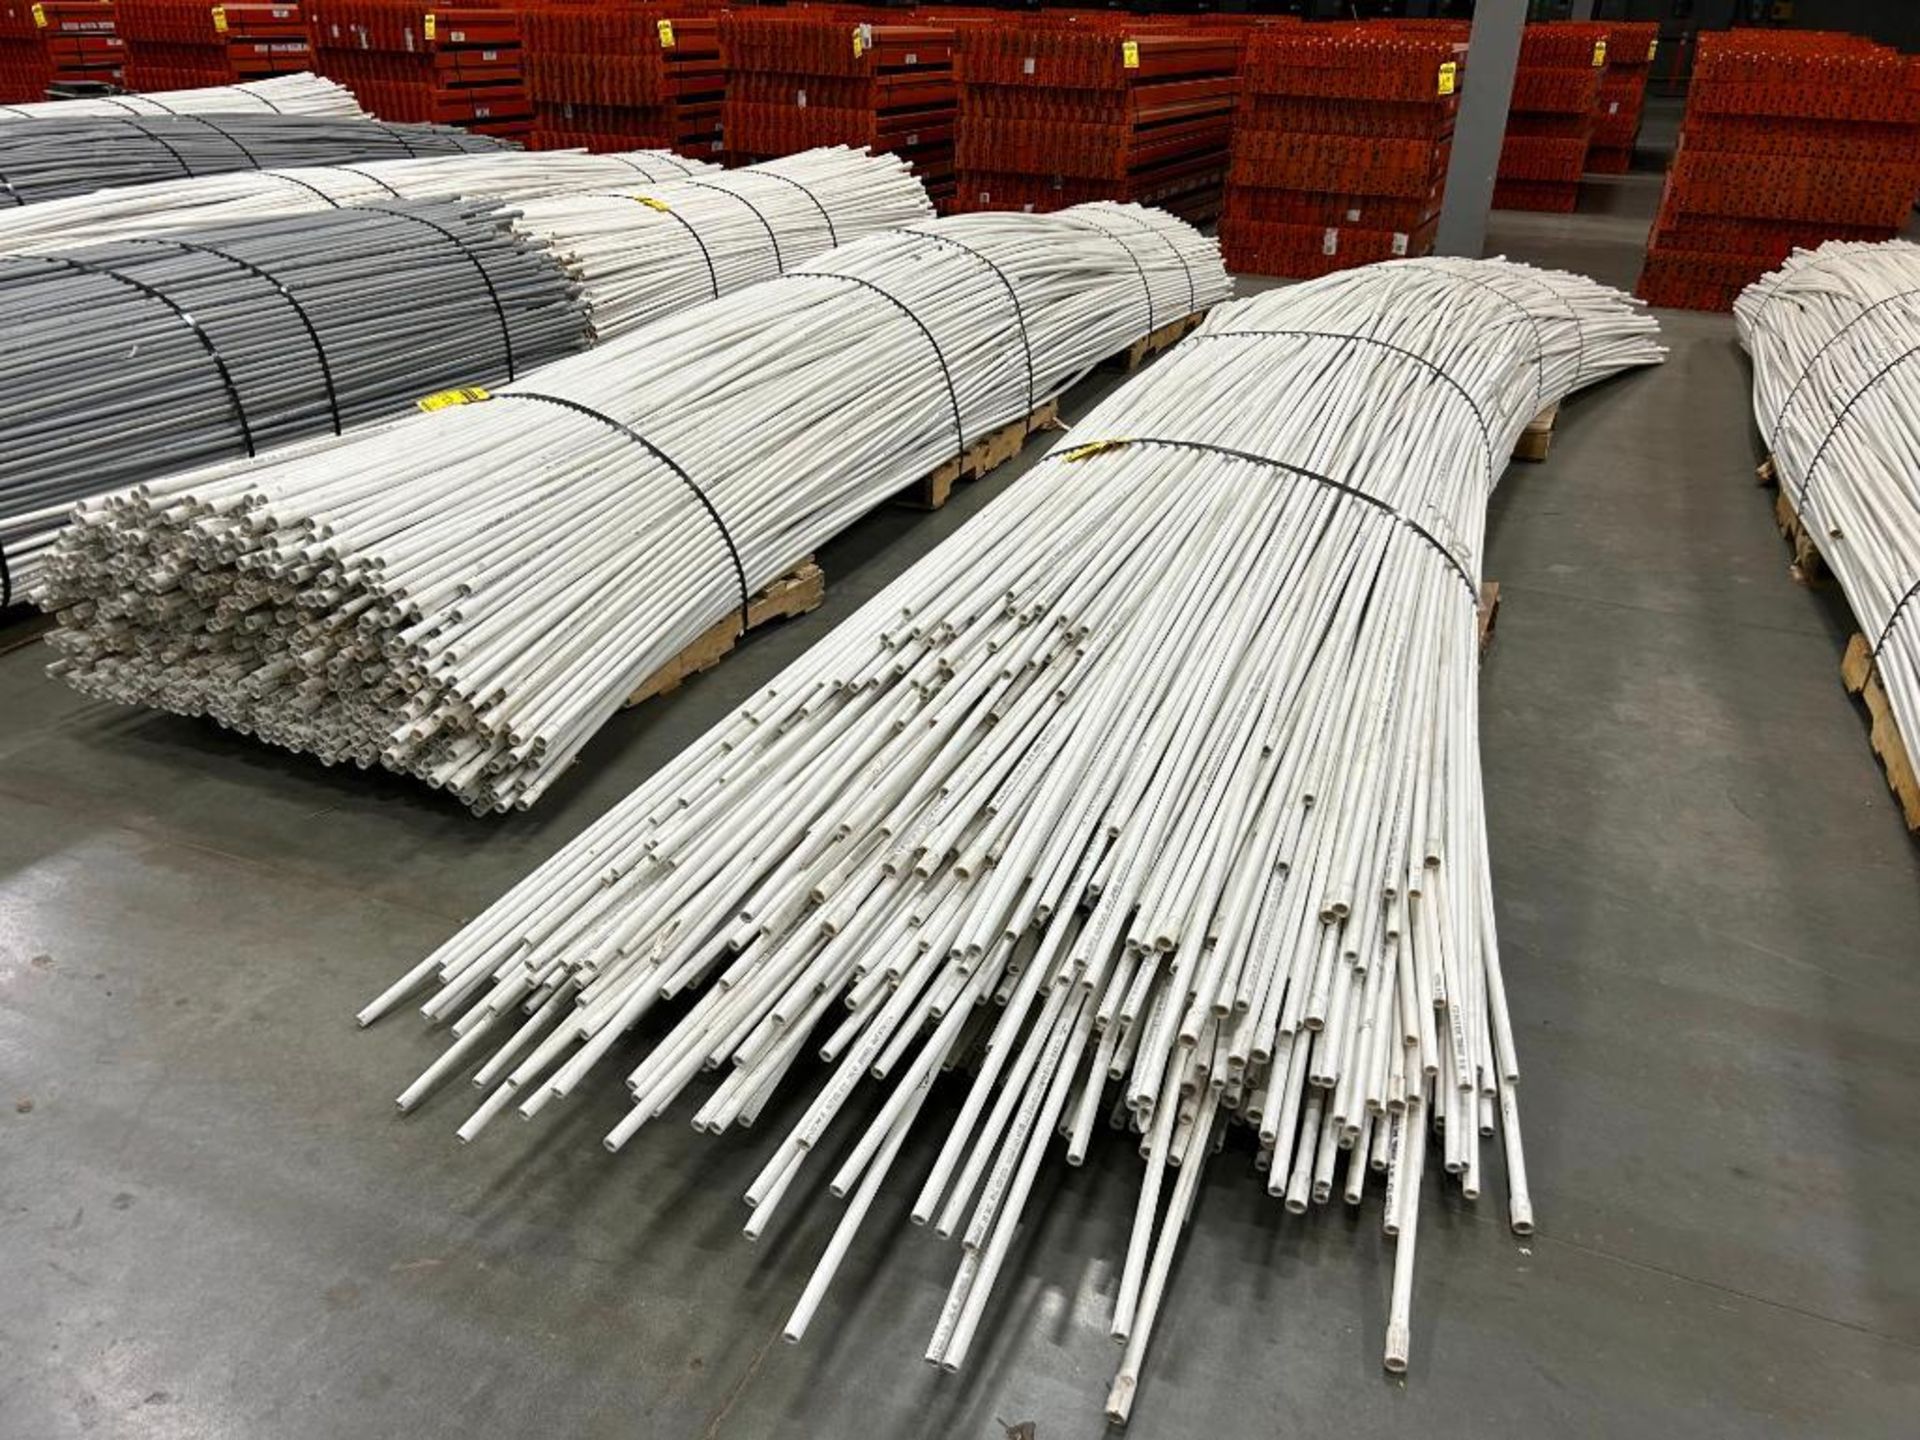 (4) Large Bundles of 1/2" X 10' PVC Conduit ($50 Loading Fee Will Be Added To Invoice)